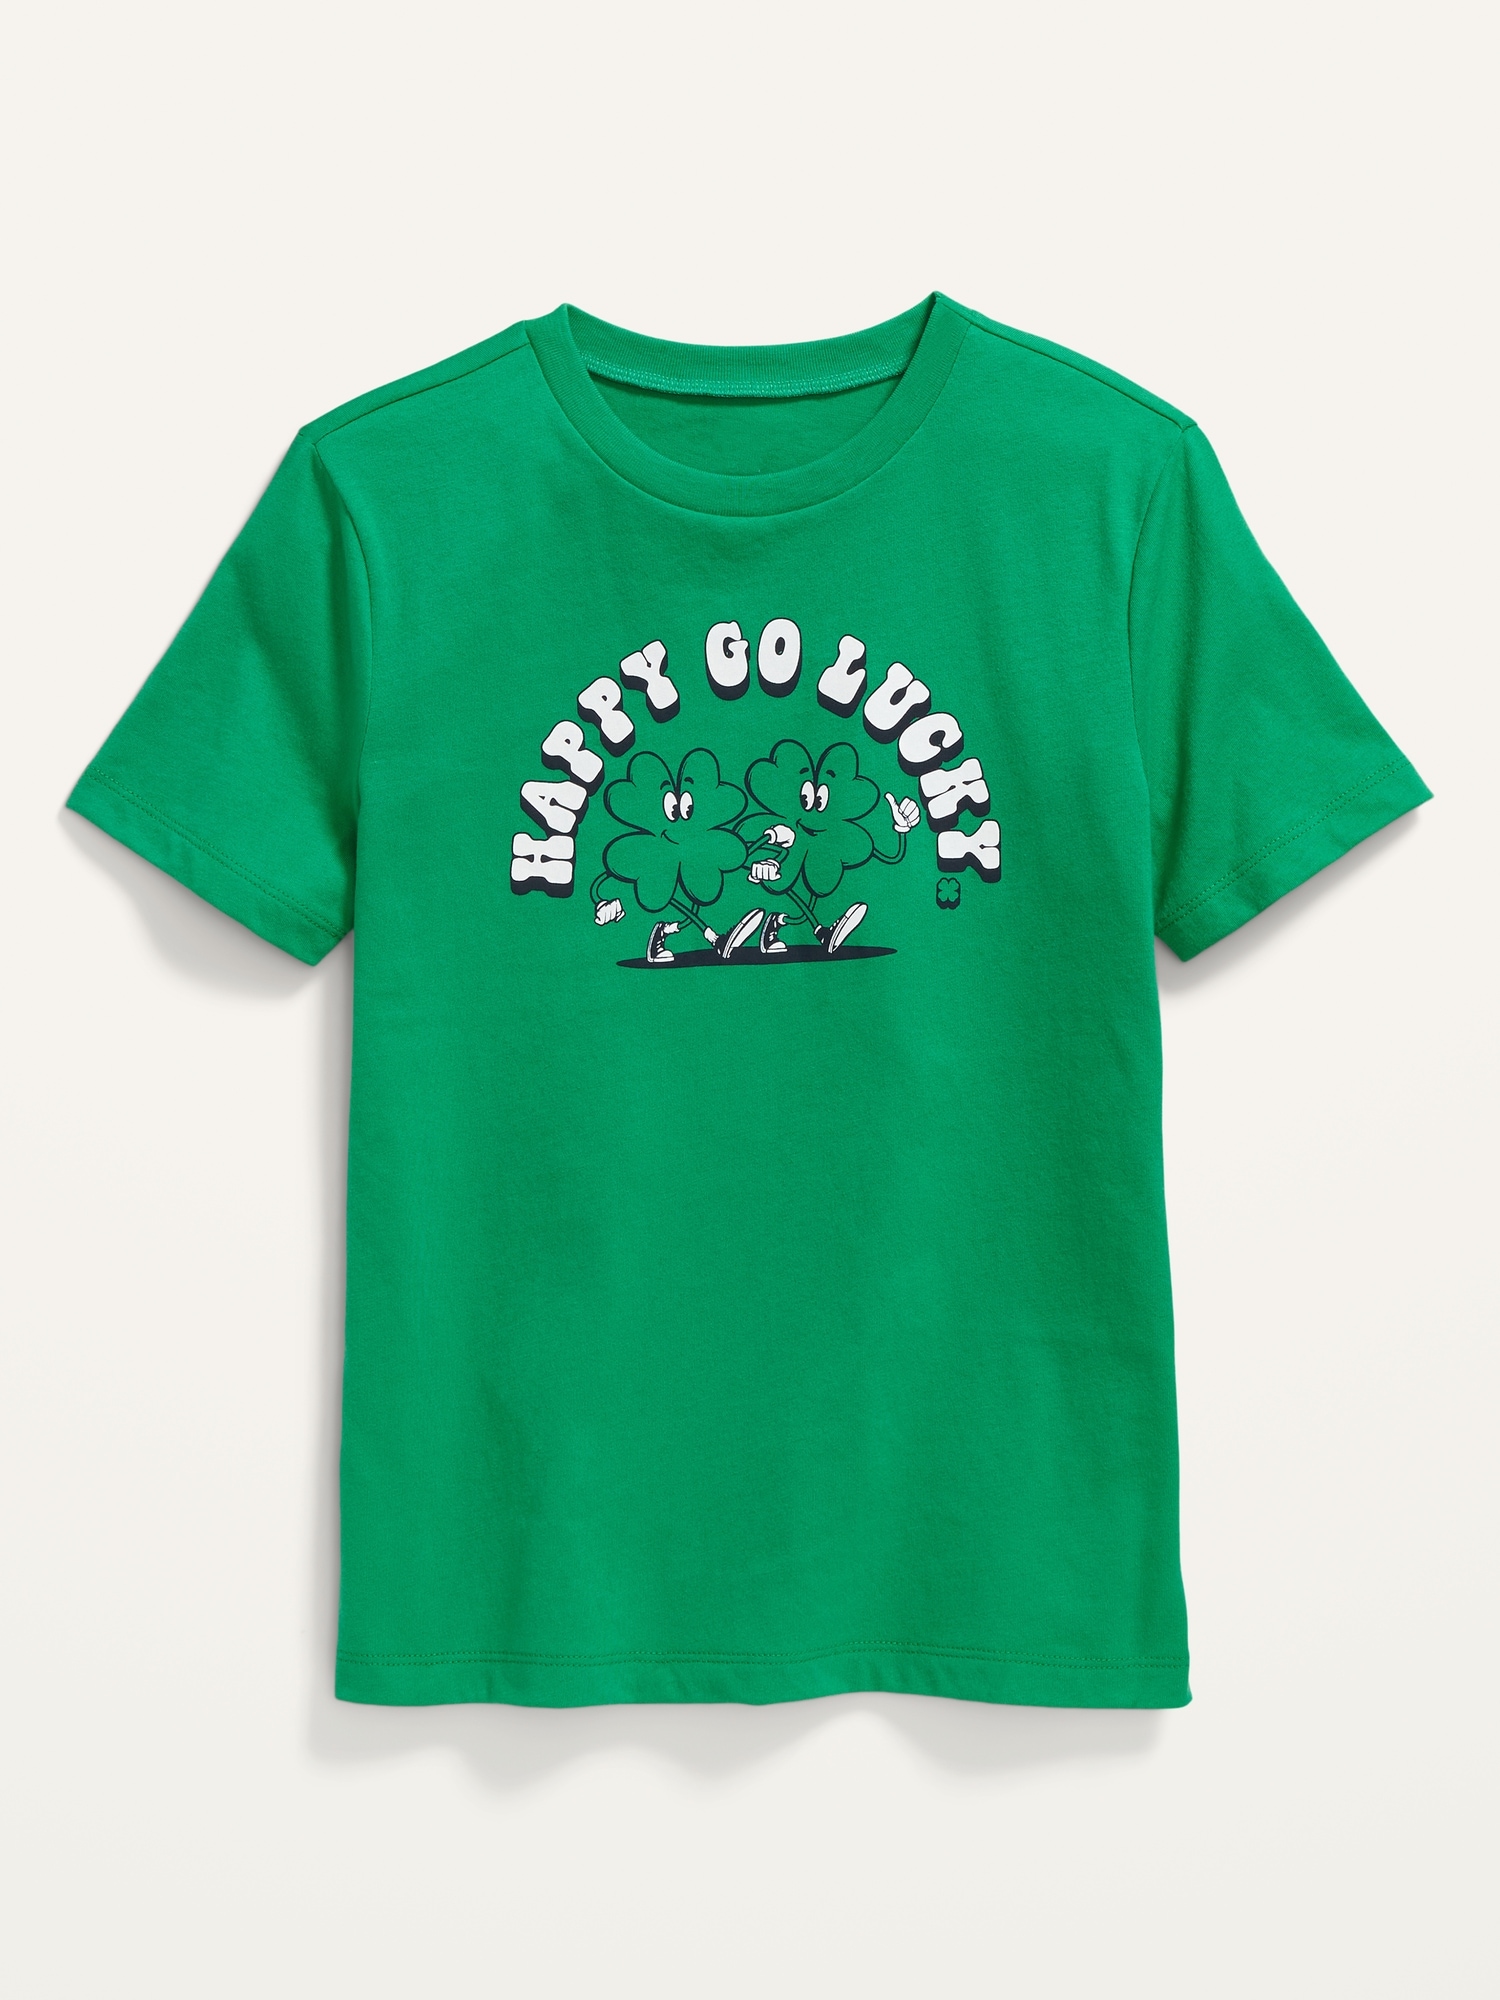 Matching St. Patrick's Day Graphic T-Shirt for Boys | Old Navy